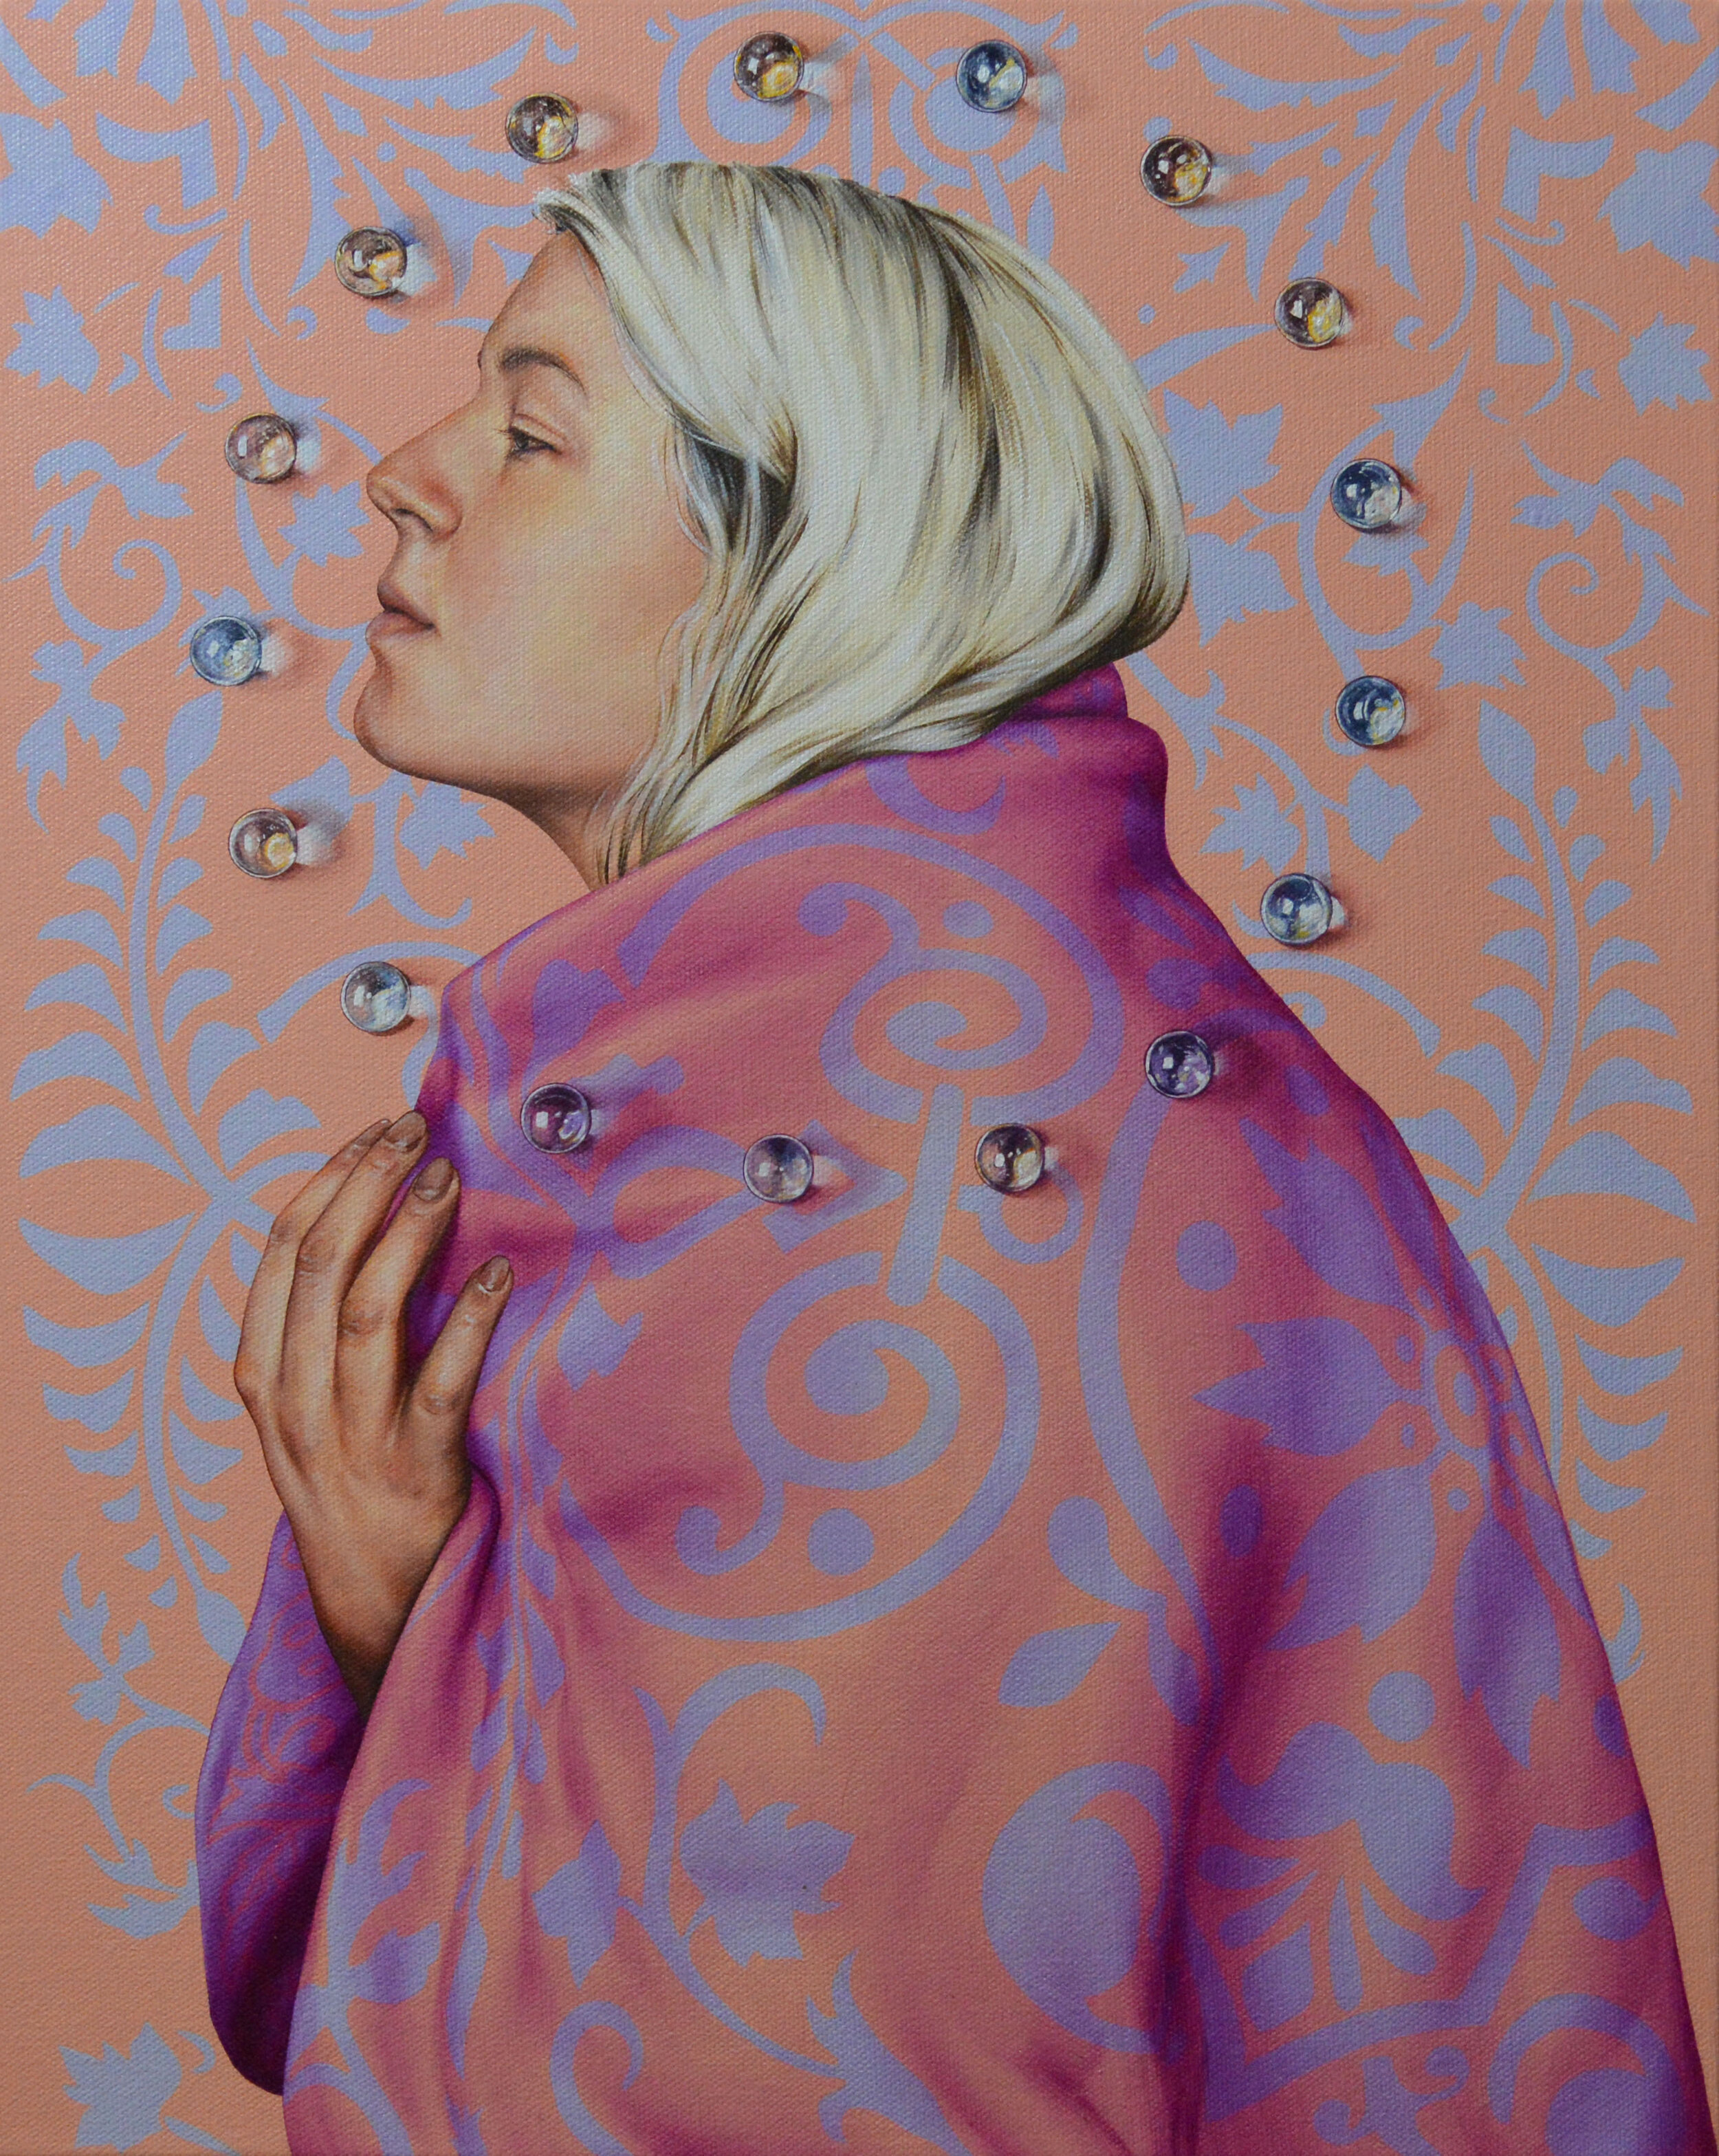  Alayna Coverly,   Self-Isolation Self Portrait   Oil on canvas, 16 x 20 inches 